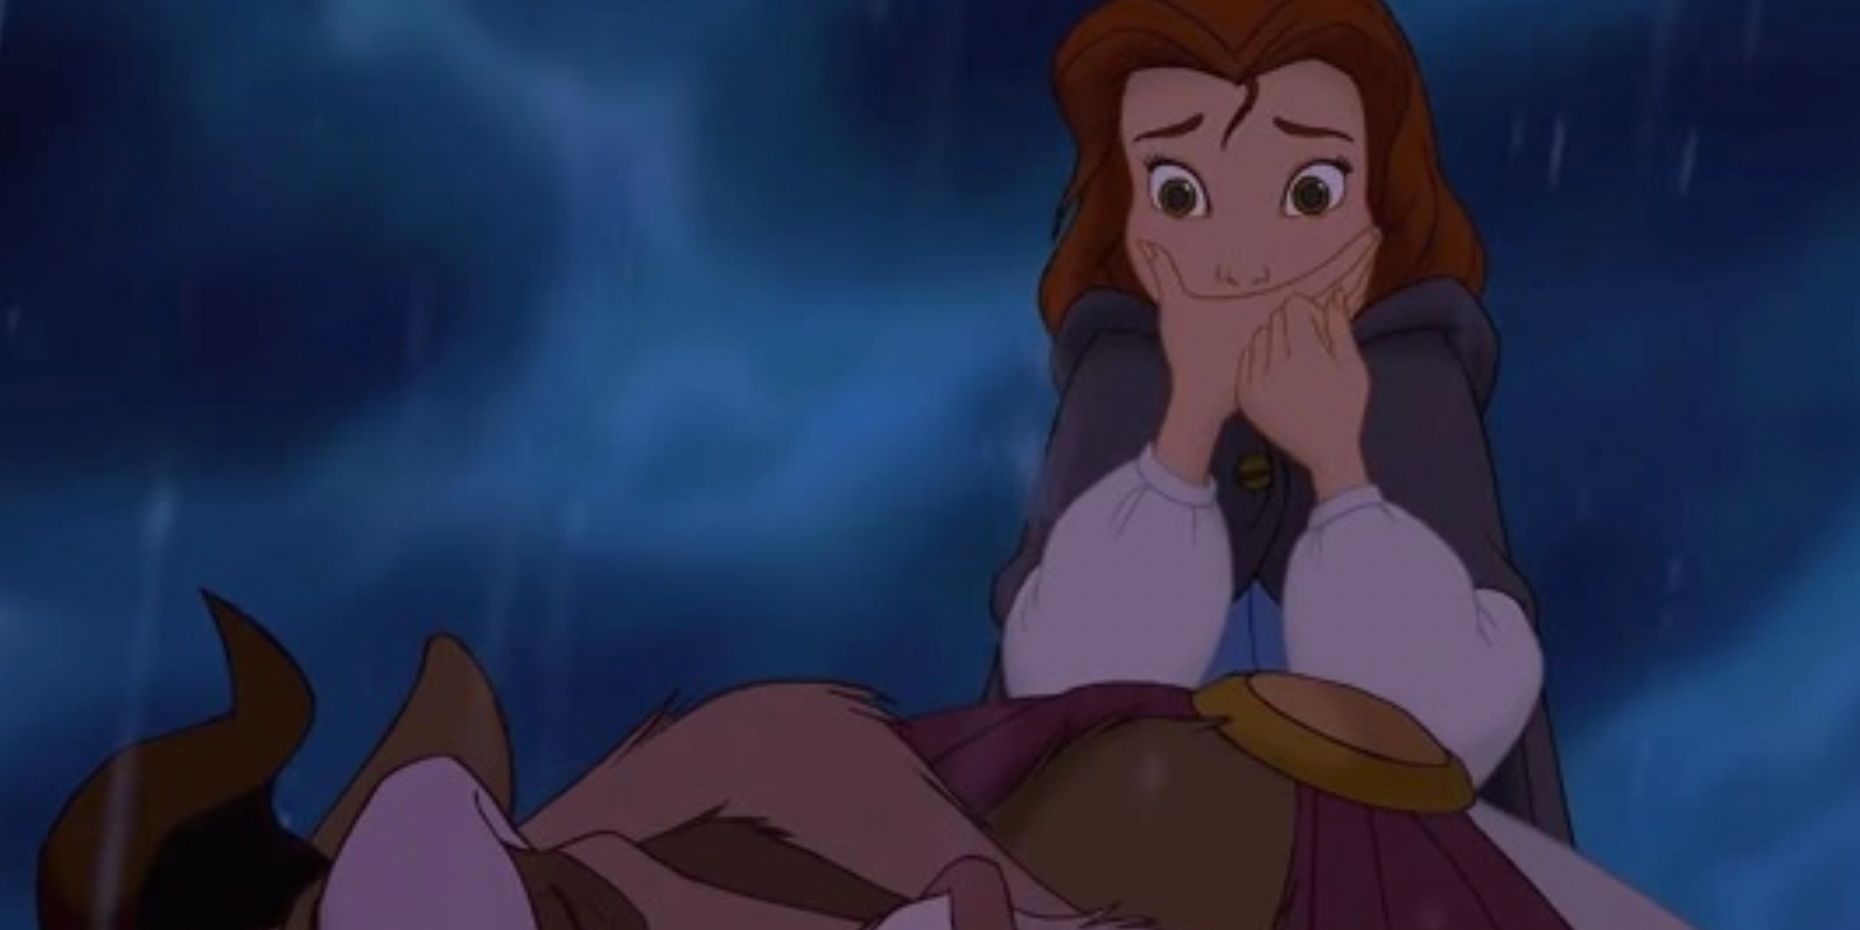 Belle watches a dying Beast in Beauty and the Beast